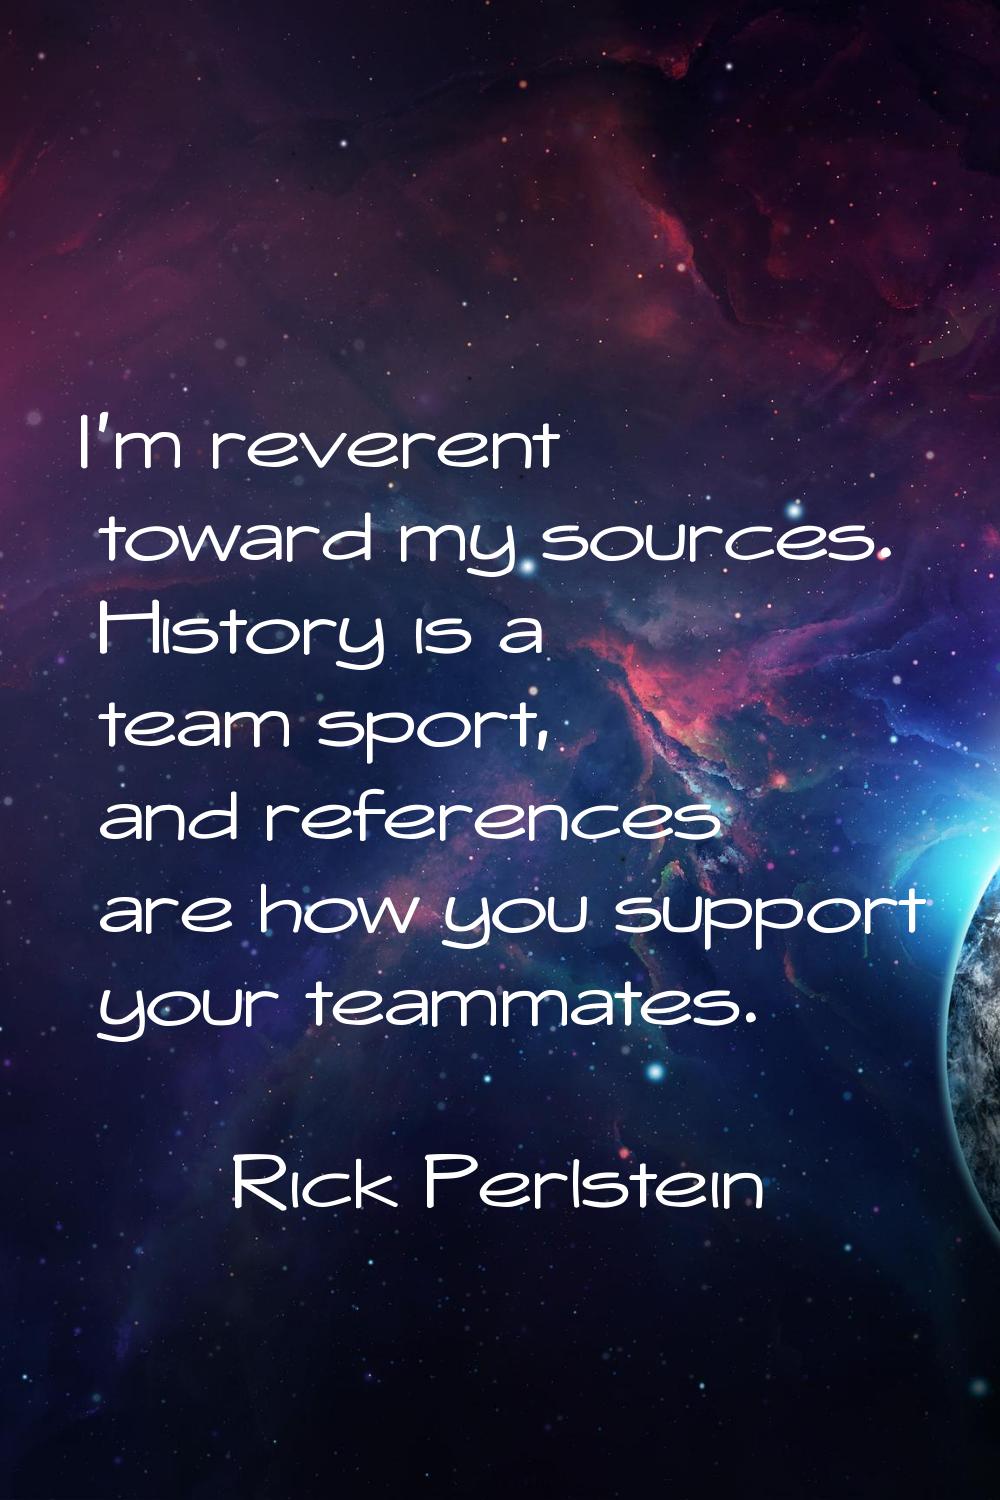 I'm reverent toward my sources. History is a team sport, and references are how you support your te